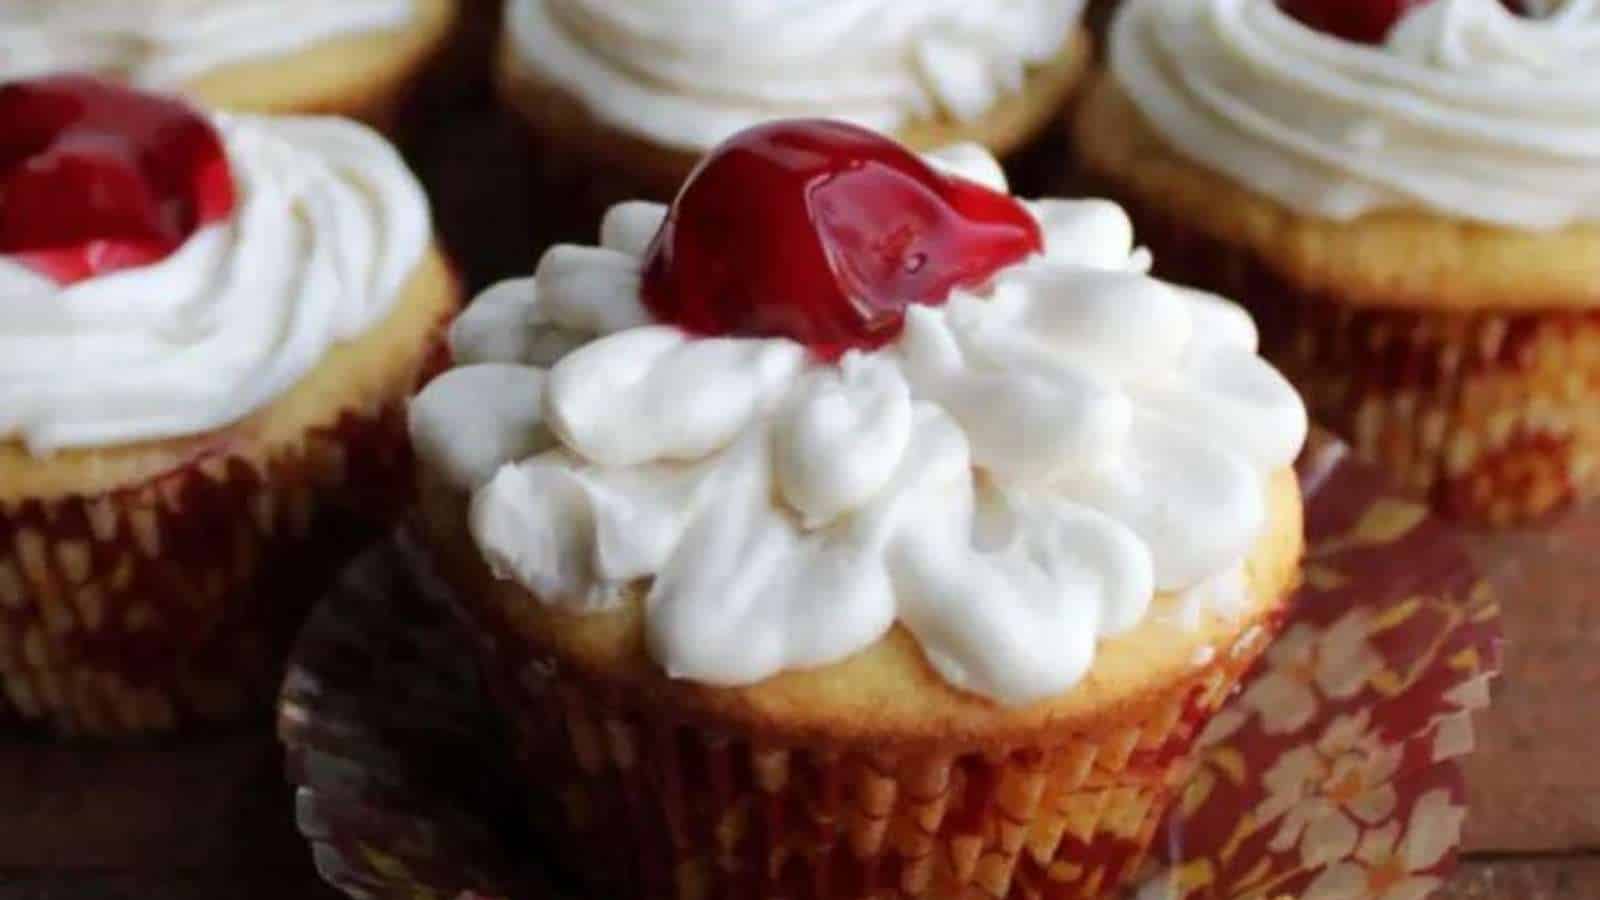 Cupcakes topped with whipped cream and cherries.